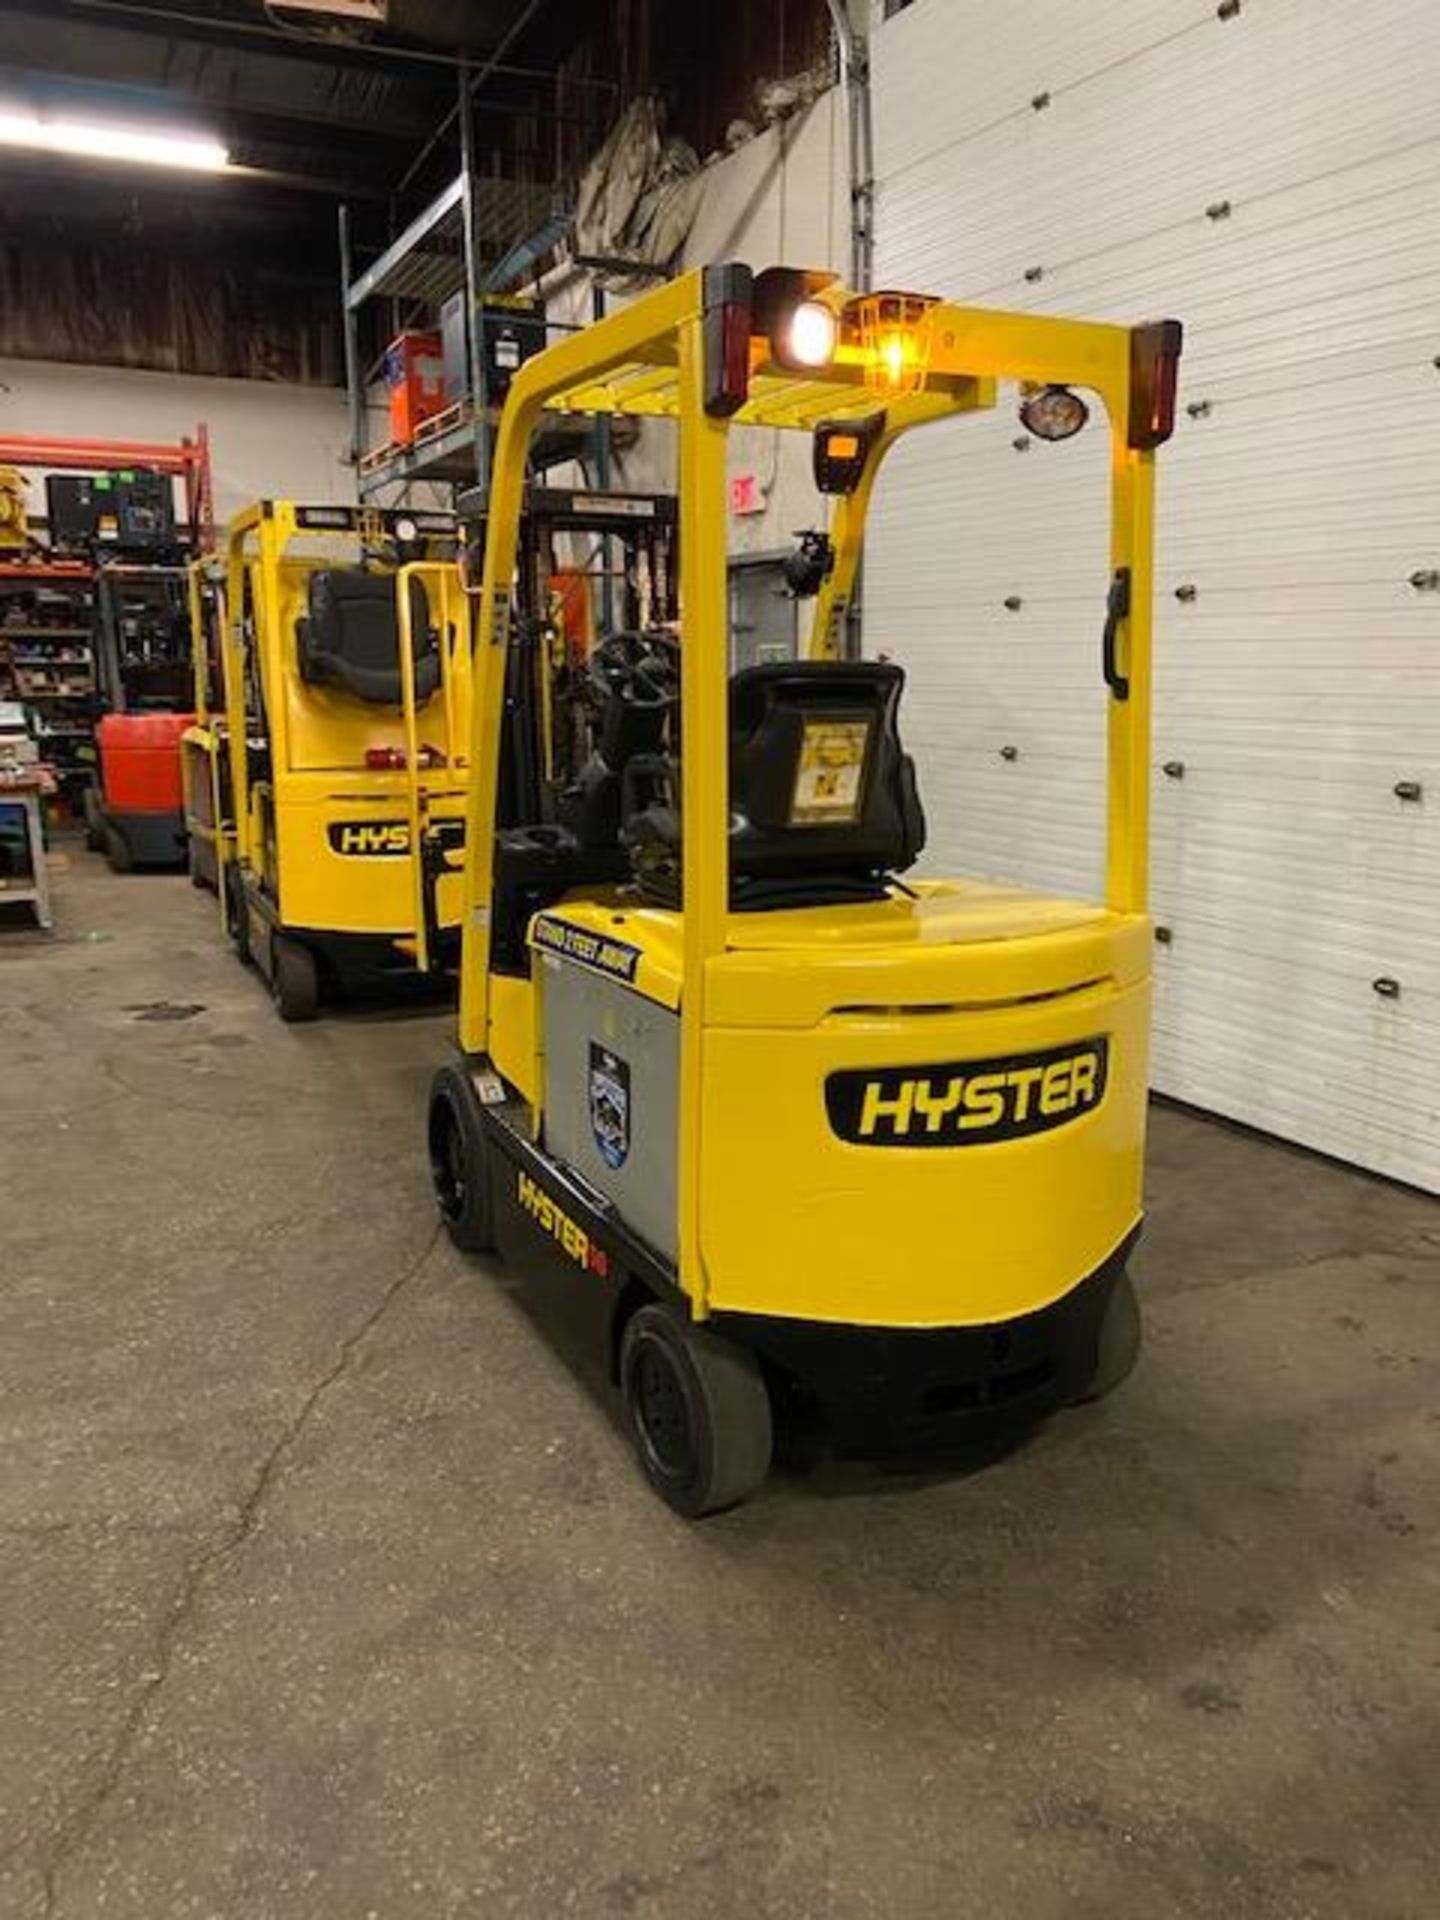 FREE CUSTOMS - 2013 Hyster 5000lbs Capacity Forklift Electric with 3-STAGE MAST sideshift MINT - Image 3 of 3